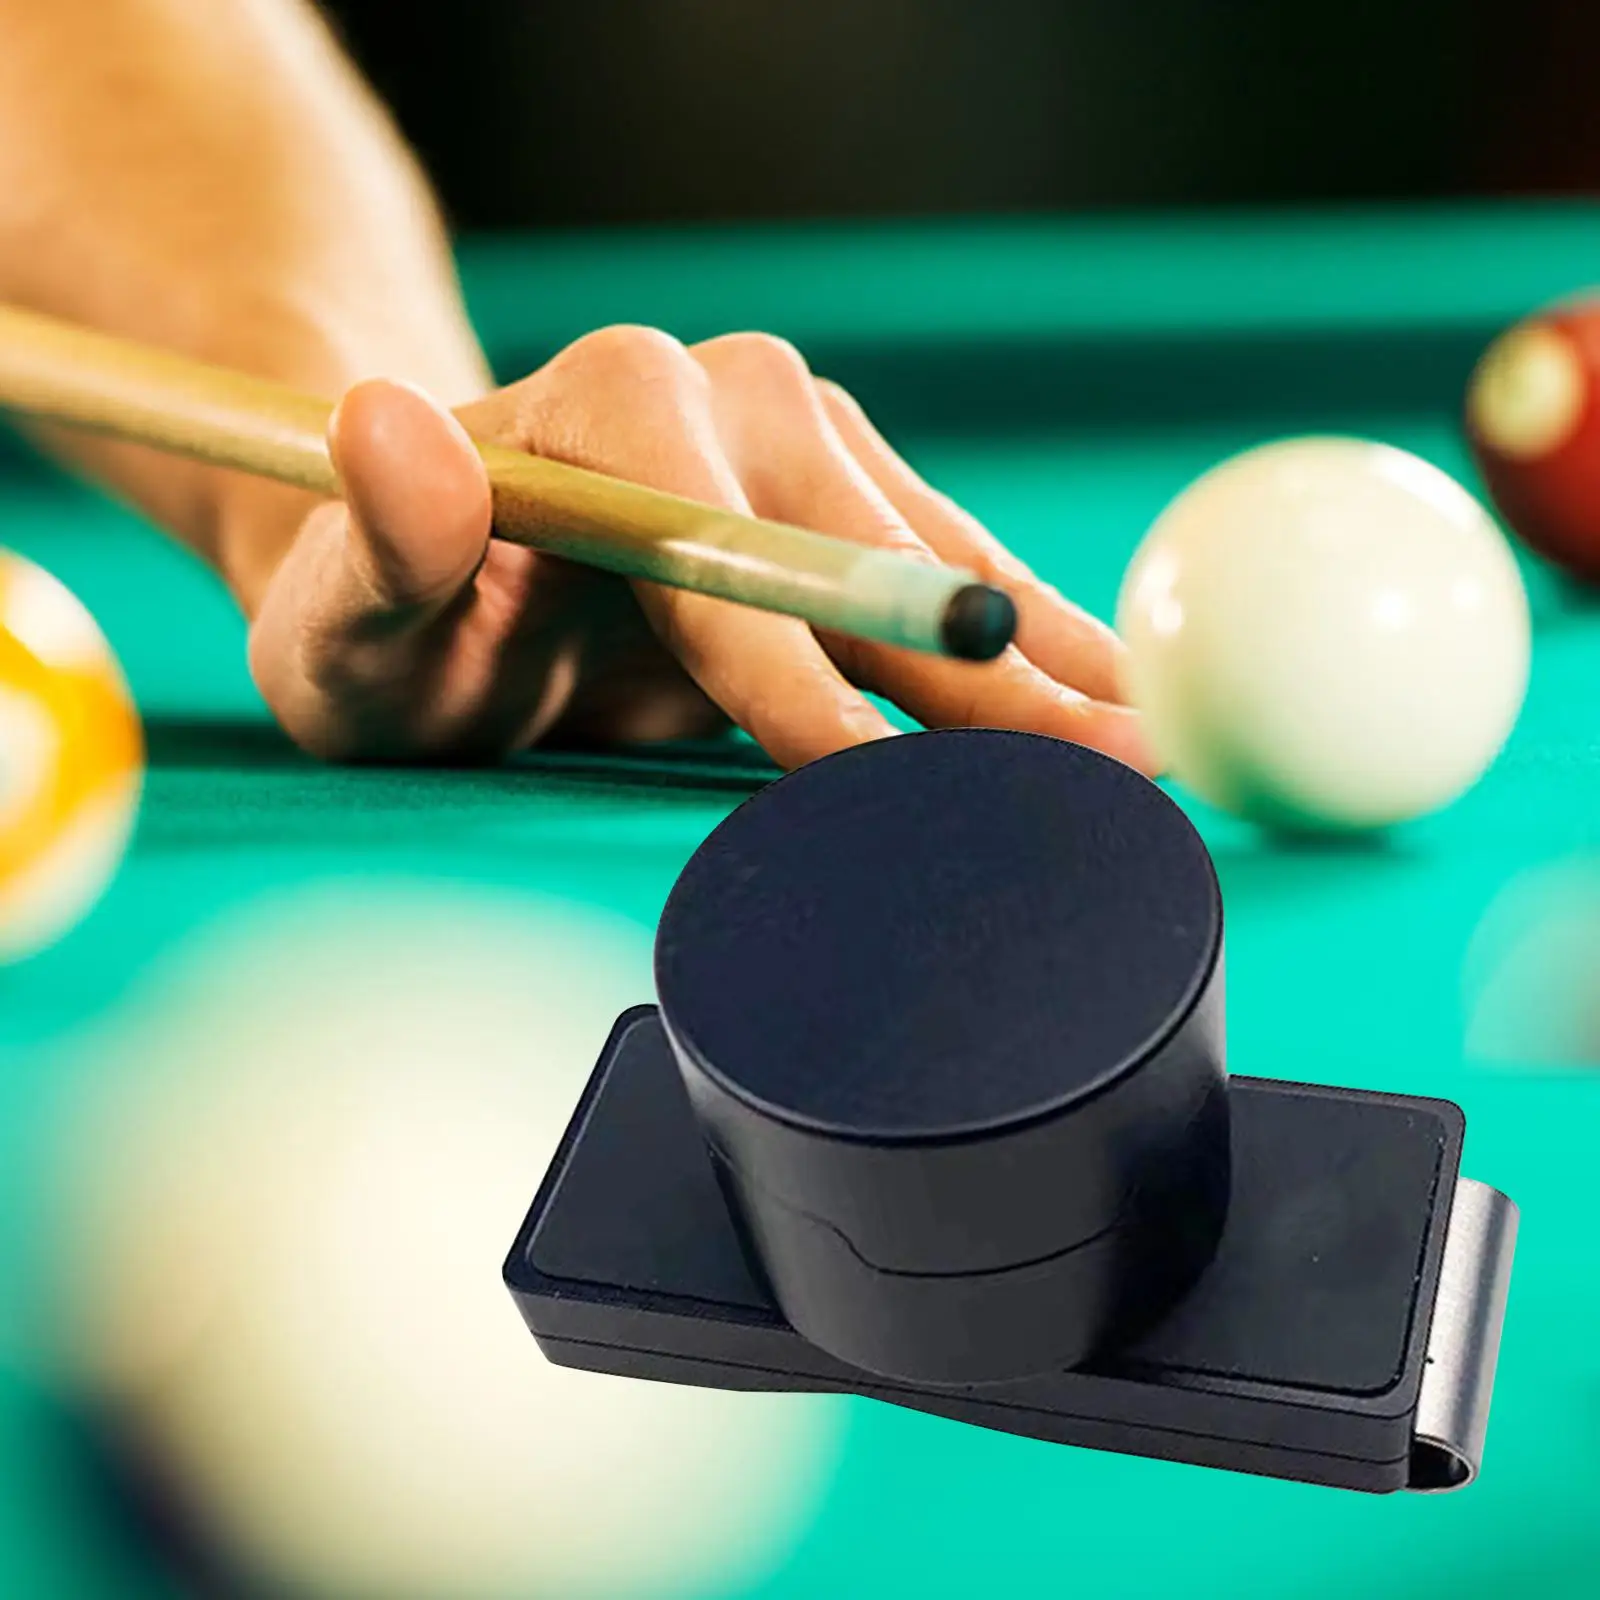 Portable Billiard Chalk Holder Easy to Use Practical Tool Billiards Pool Cue Chalk Holder Entertainment Pool Table Accessories